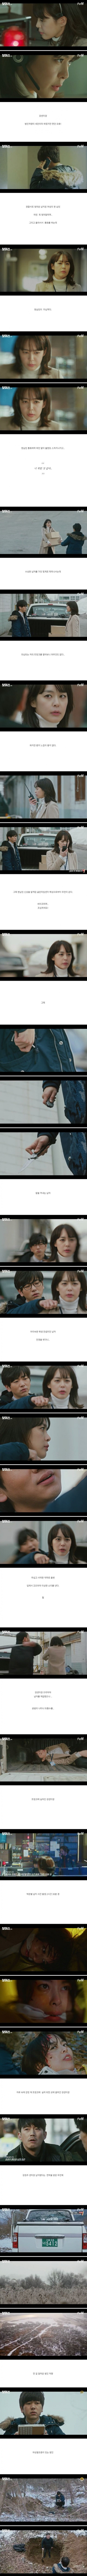 episodes 3 and 4 captures for the Korean drama 'Voice'